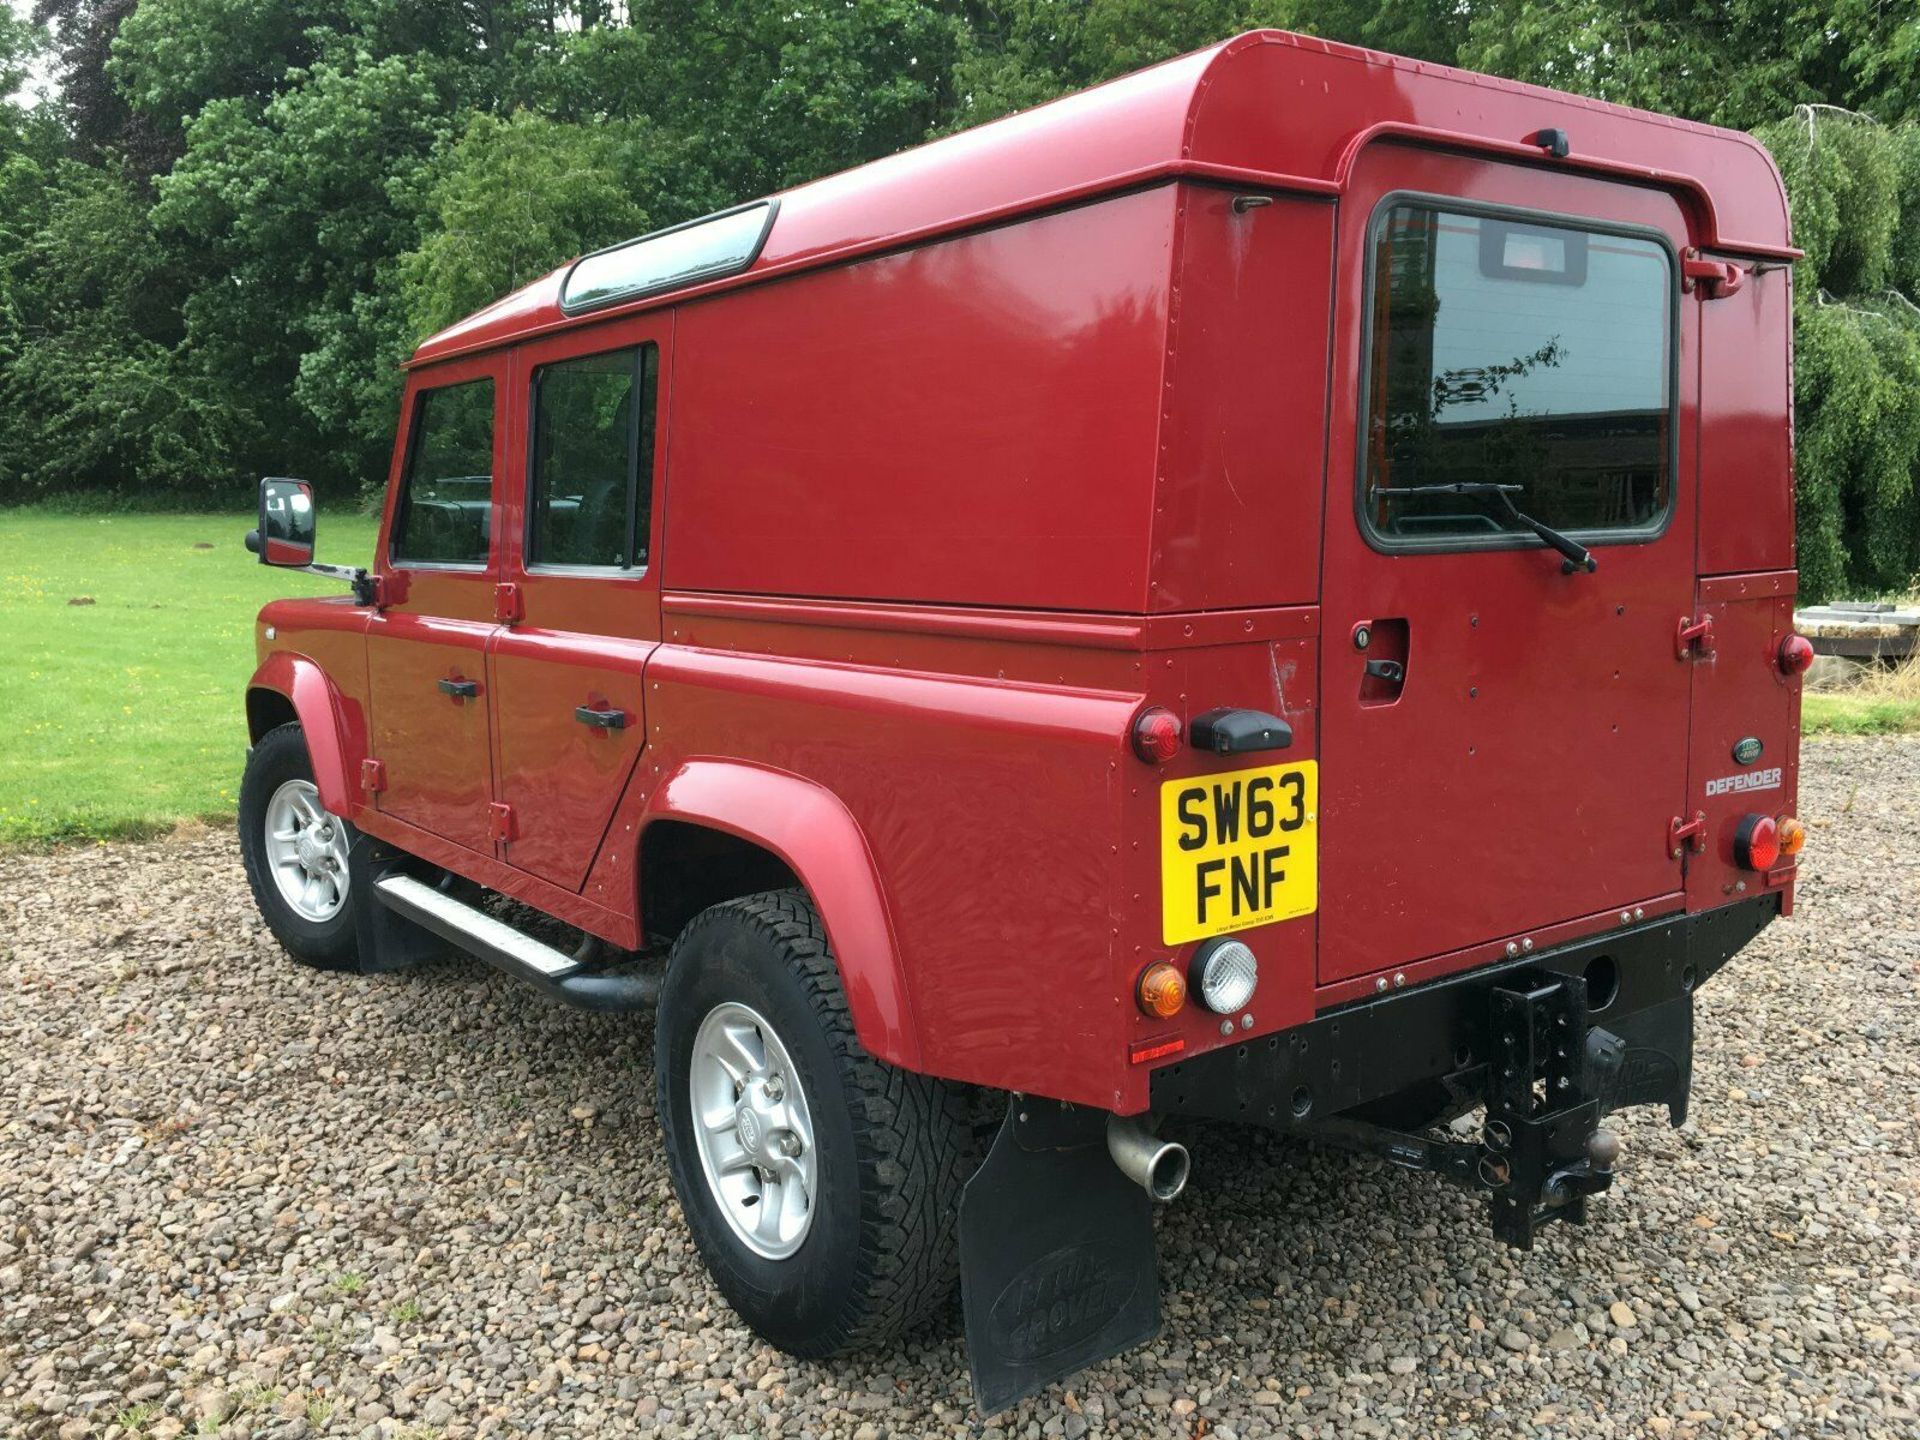 2013/63 REG LAND ROVER DEFENDER 110 TD XS UTILITY WAGON 2.2 DIESEL 125HP, SHOWING 2 FORMER KEEPERS - Image 5 of 9